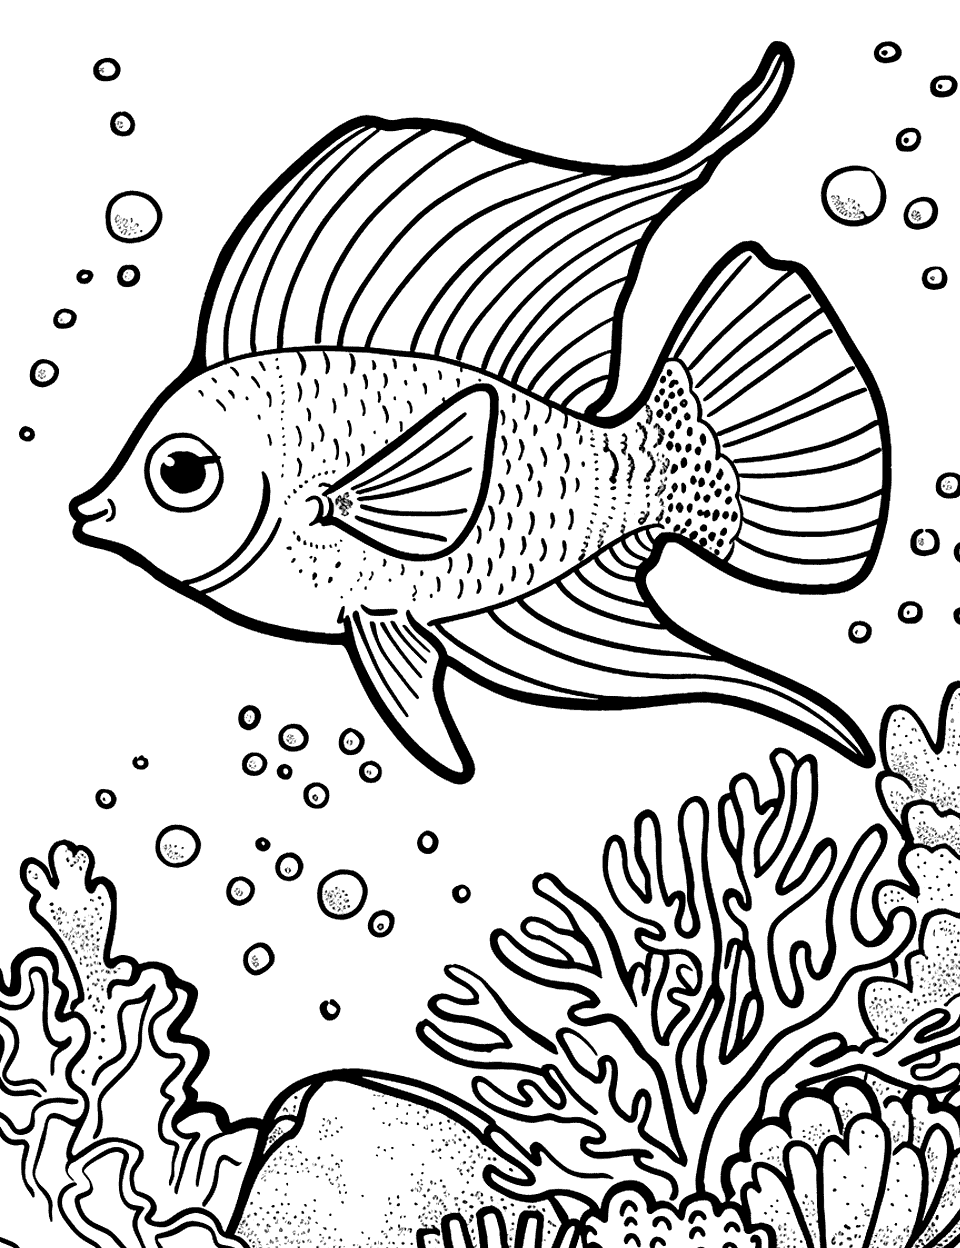 Angelfish Gliding Among Coral Sea Creature Coloring Page - An angelfish swims gracefully among coral reefs.